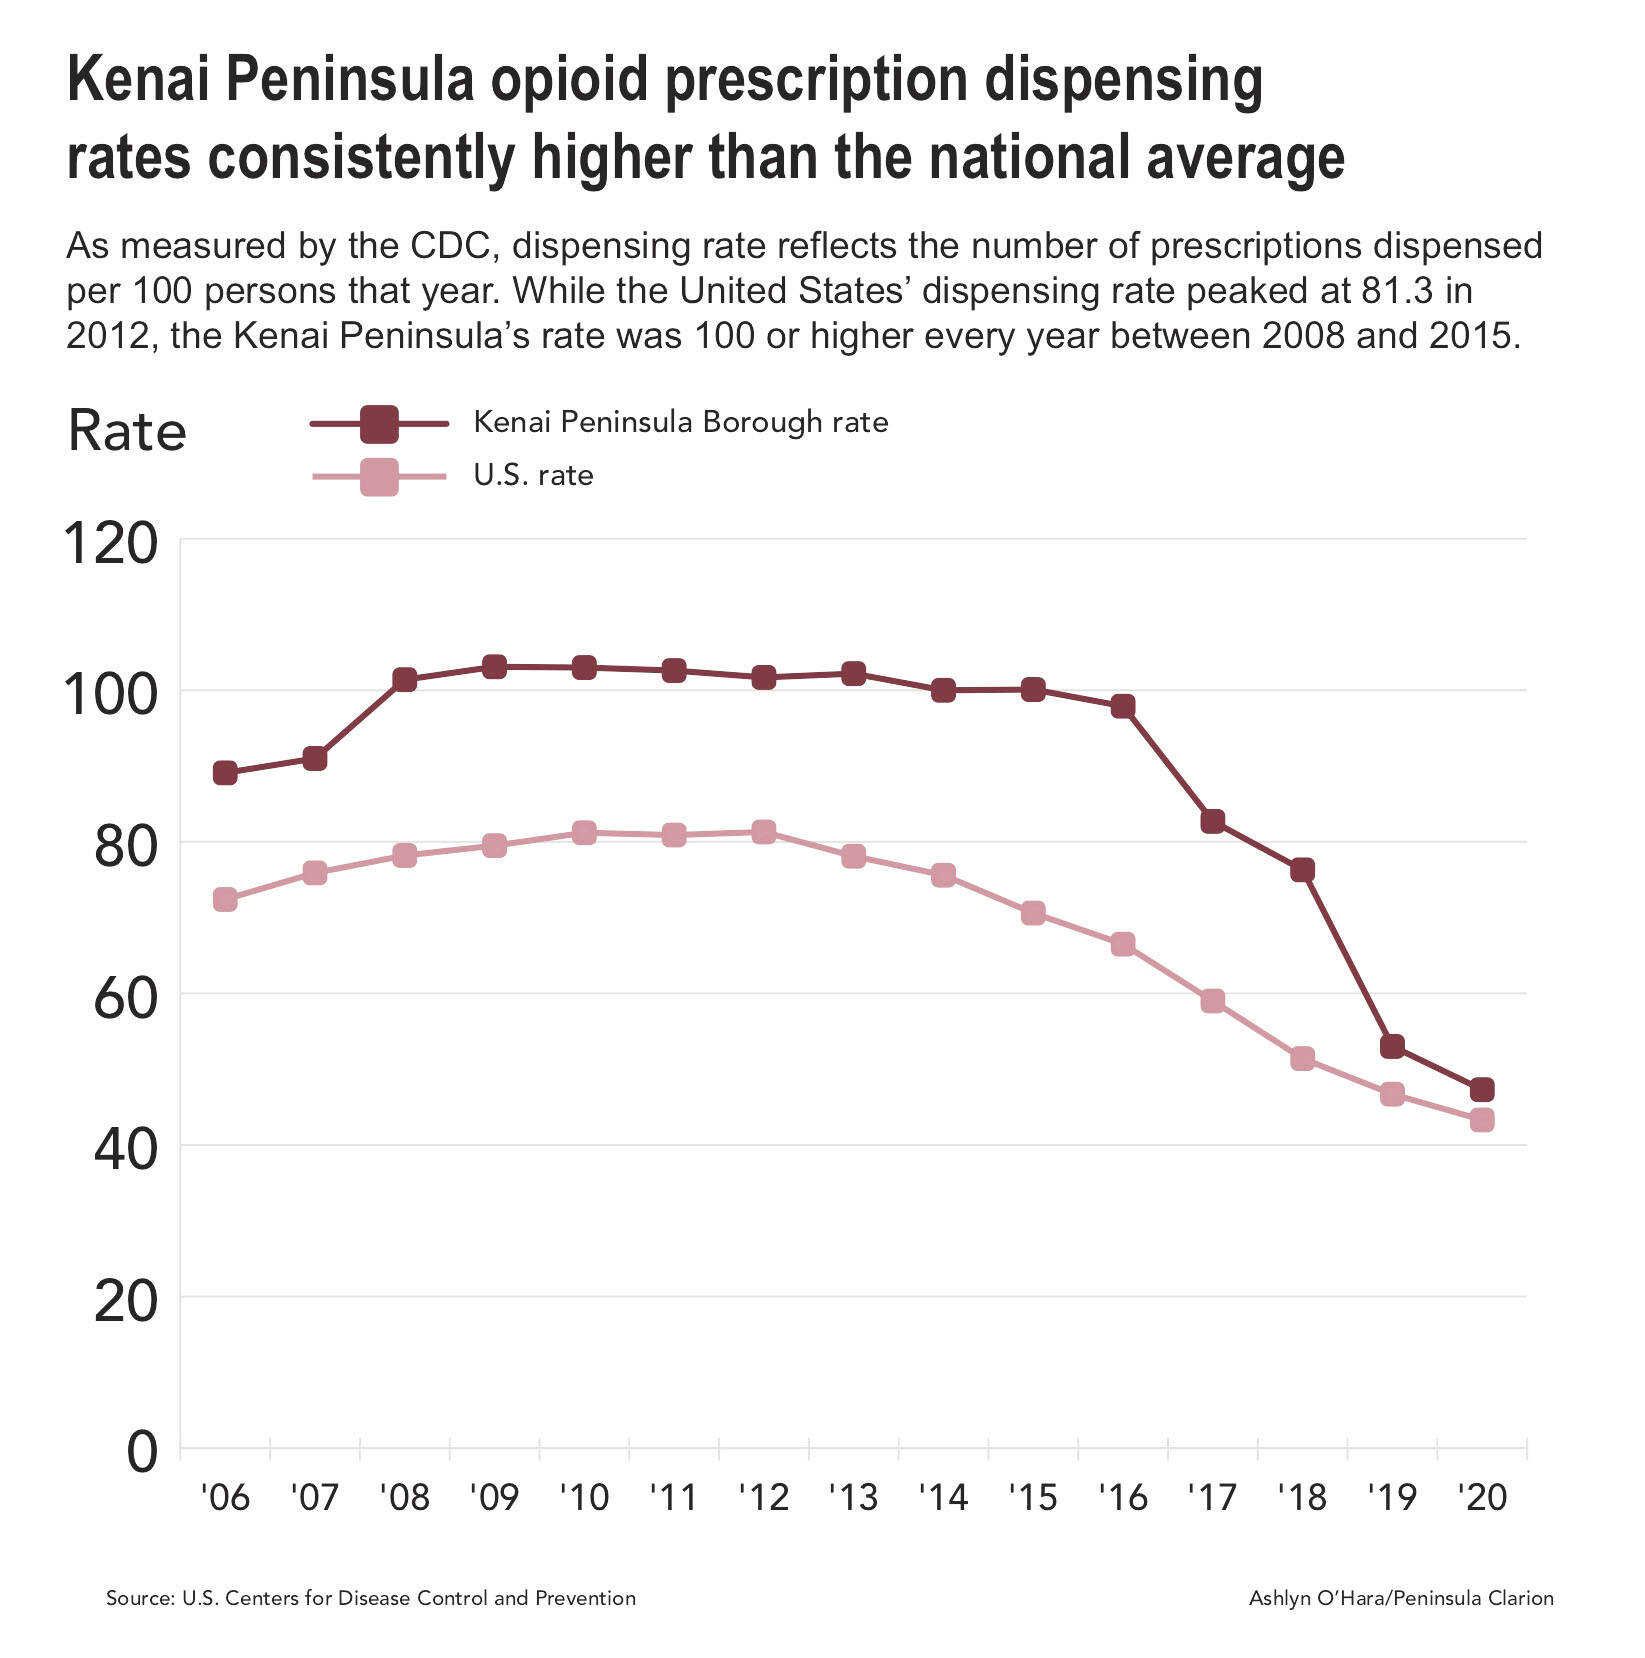 As measured by the CDC, dispensing rate reflects the number of prescriptions dispensed per 100 persons per year. While the United States’ dispensing rate peaked at 81.3 in 2012, the Kenai Peninsula’s rate was 100 or higher every year between 2001 and 2015. Graphic by Ashlyn O’Hara.